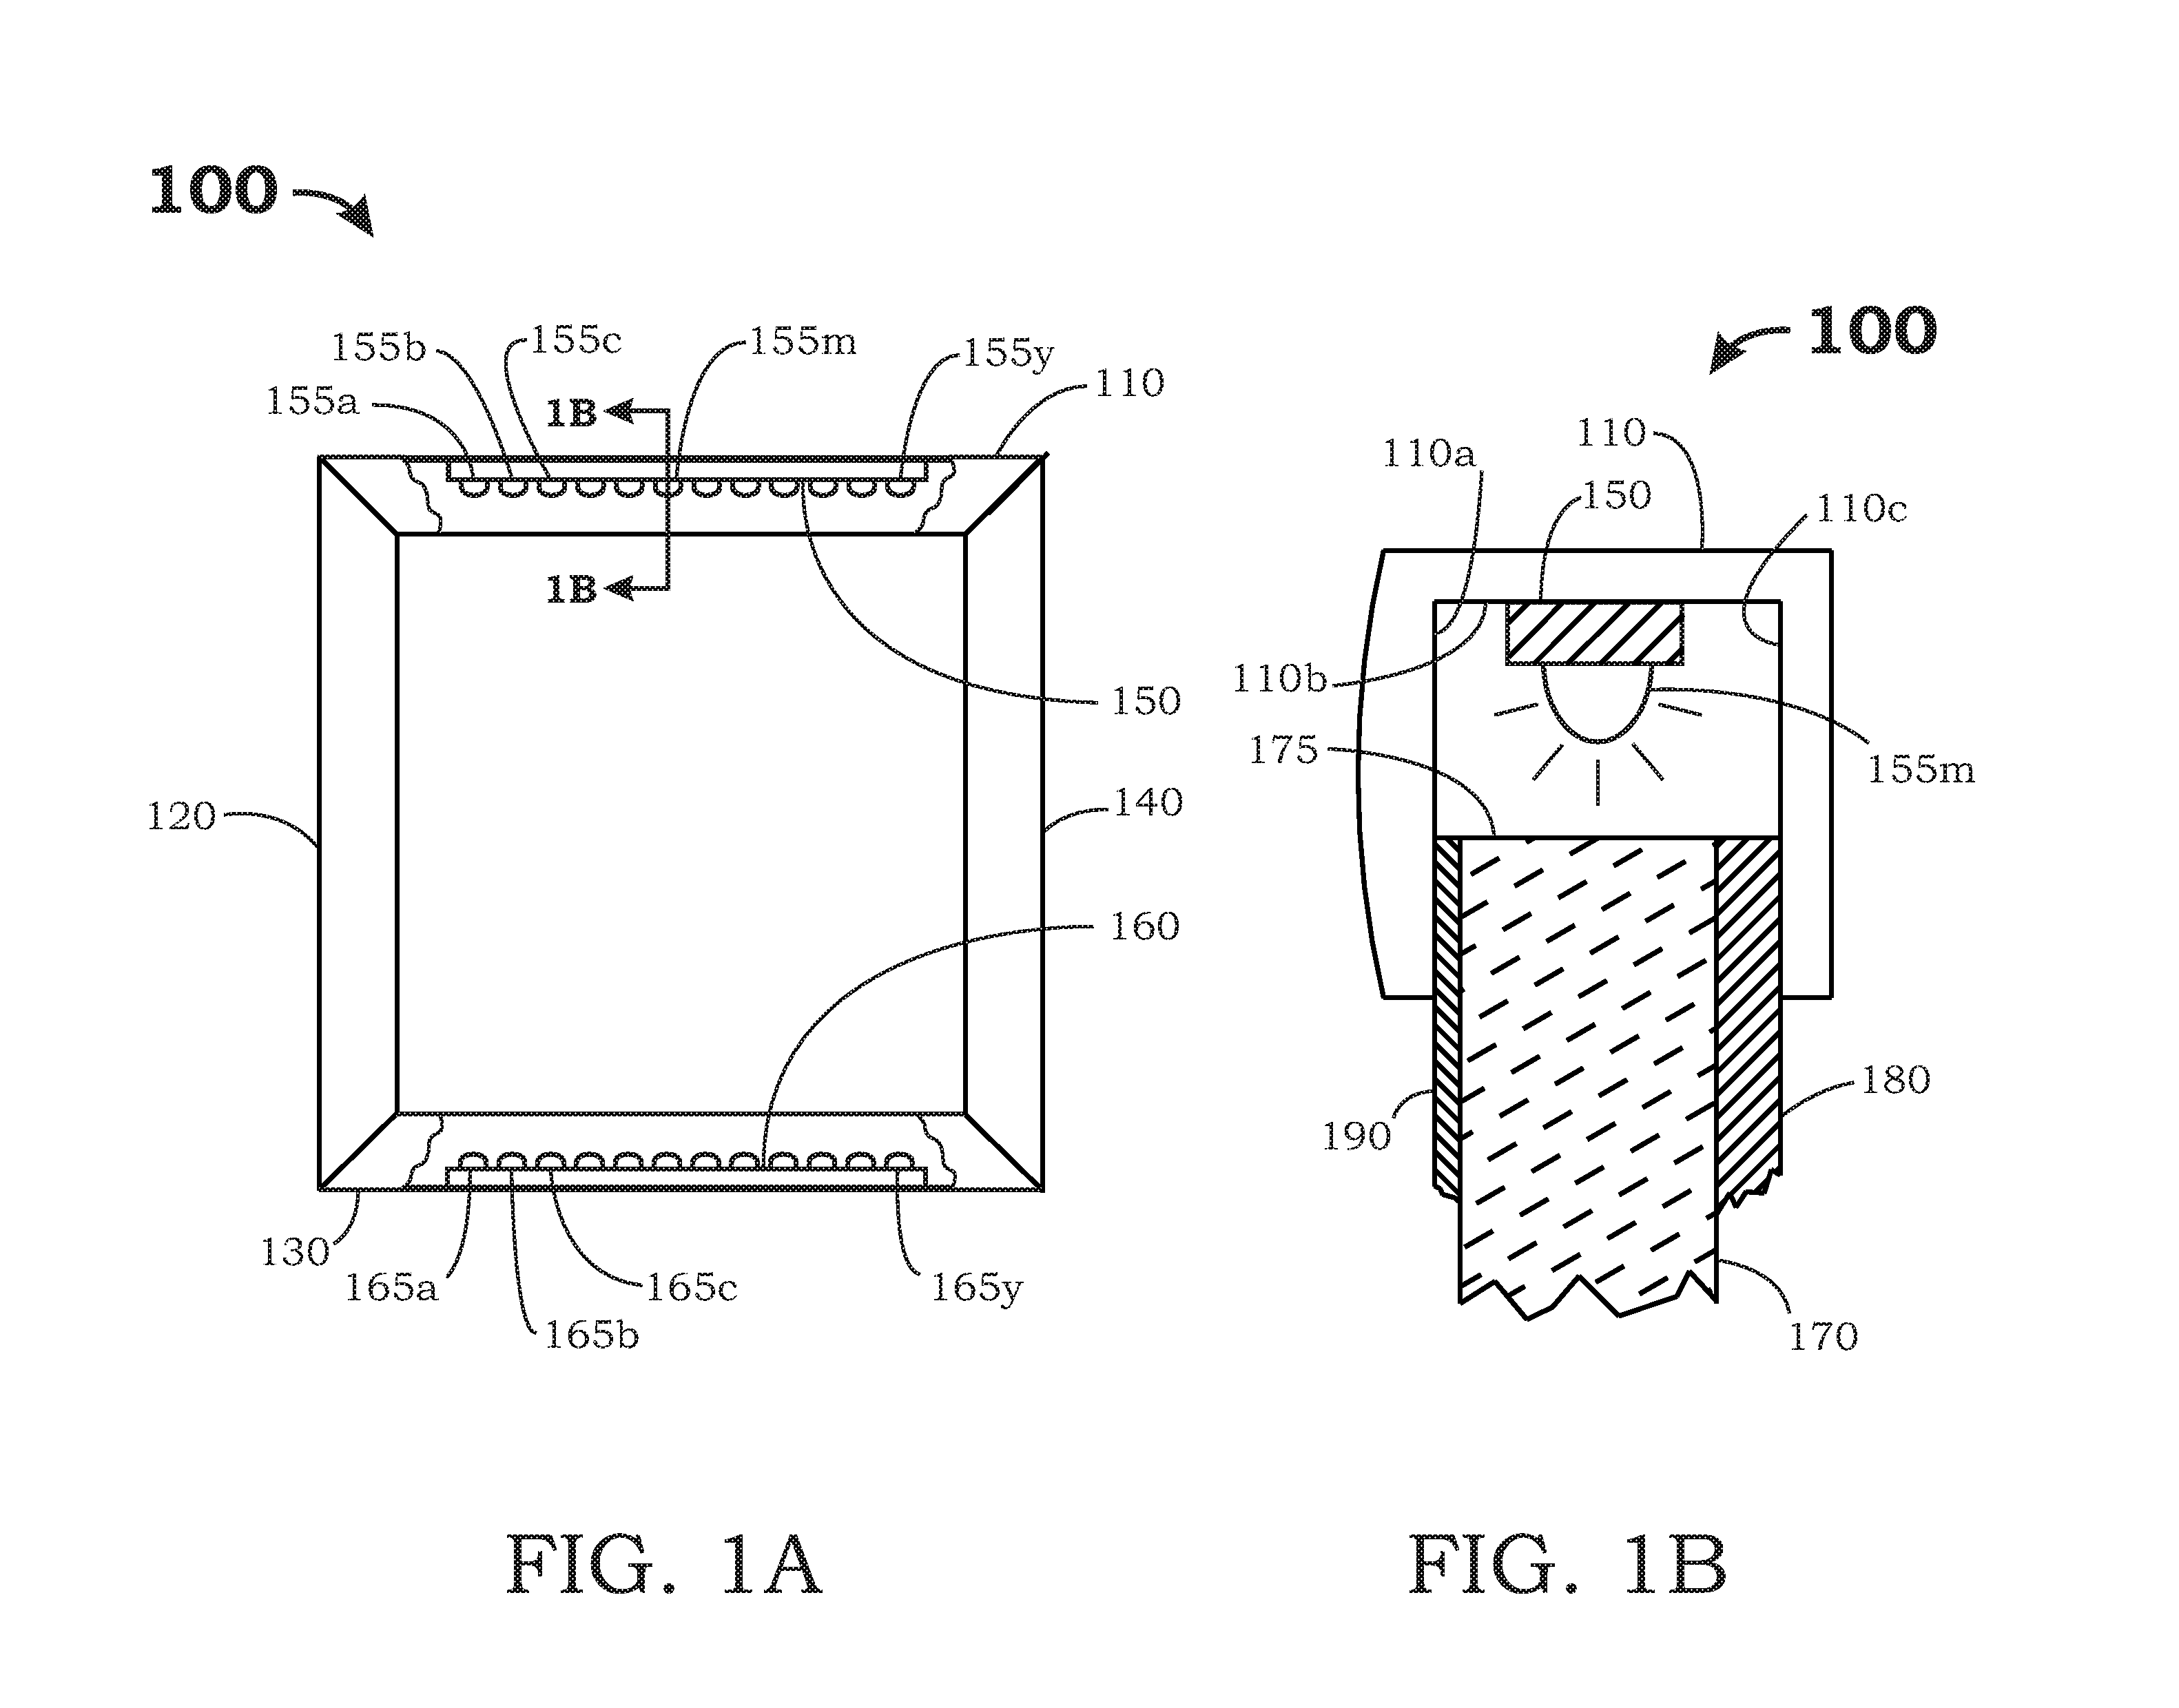 System and methods for illuminating panels